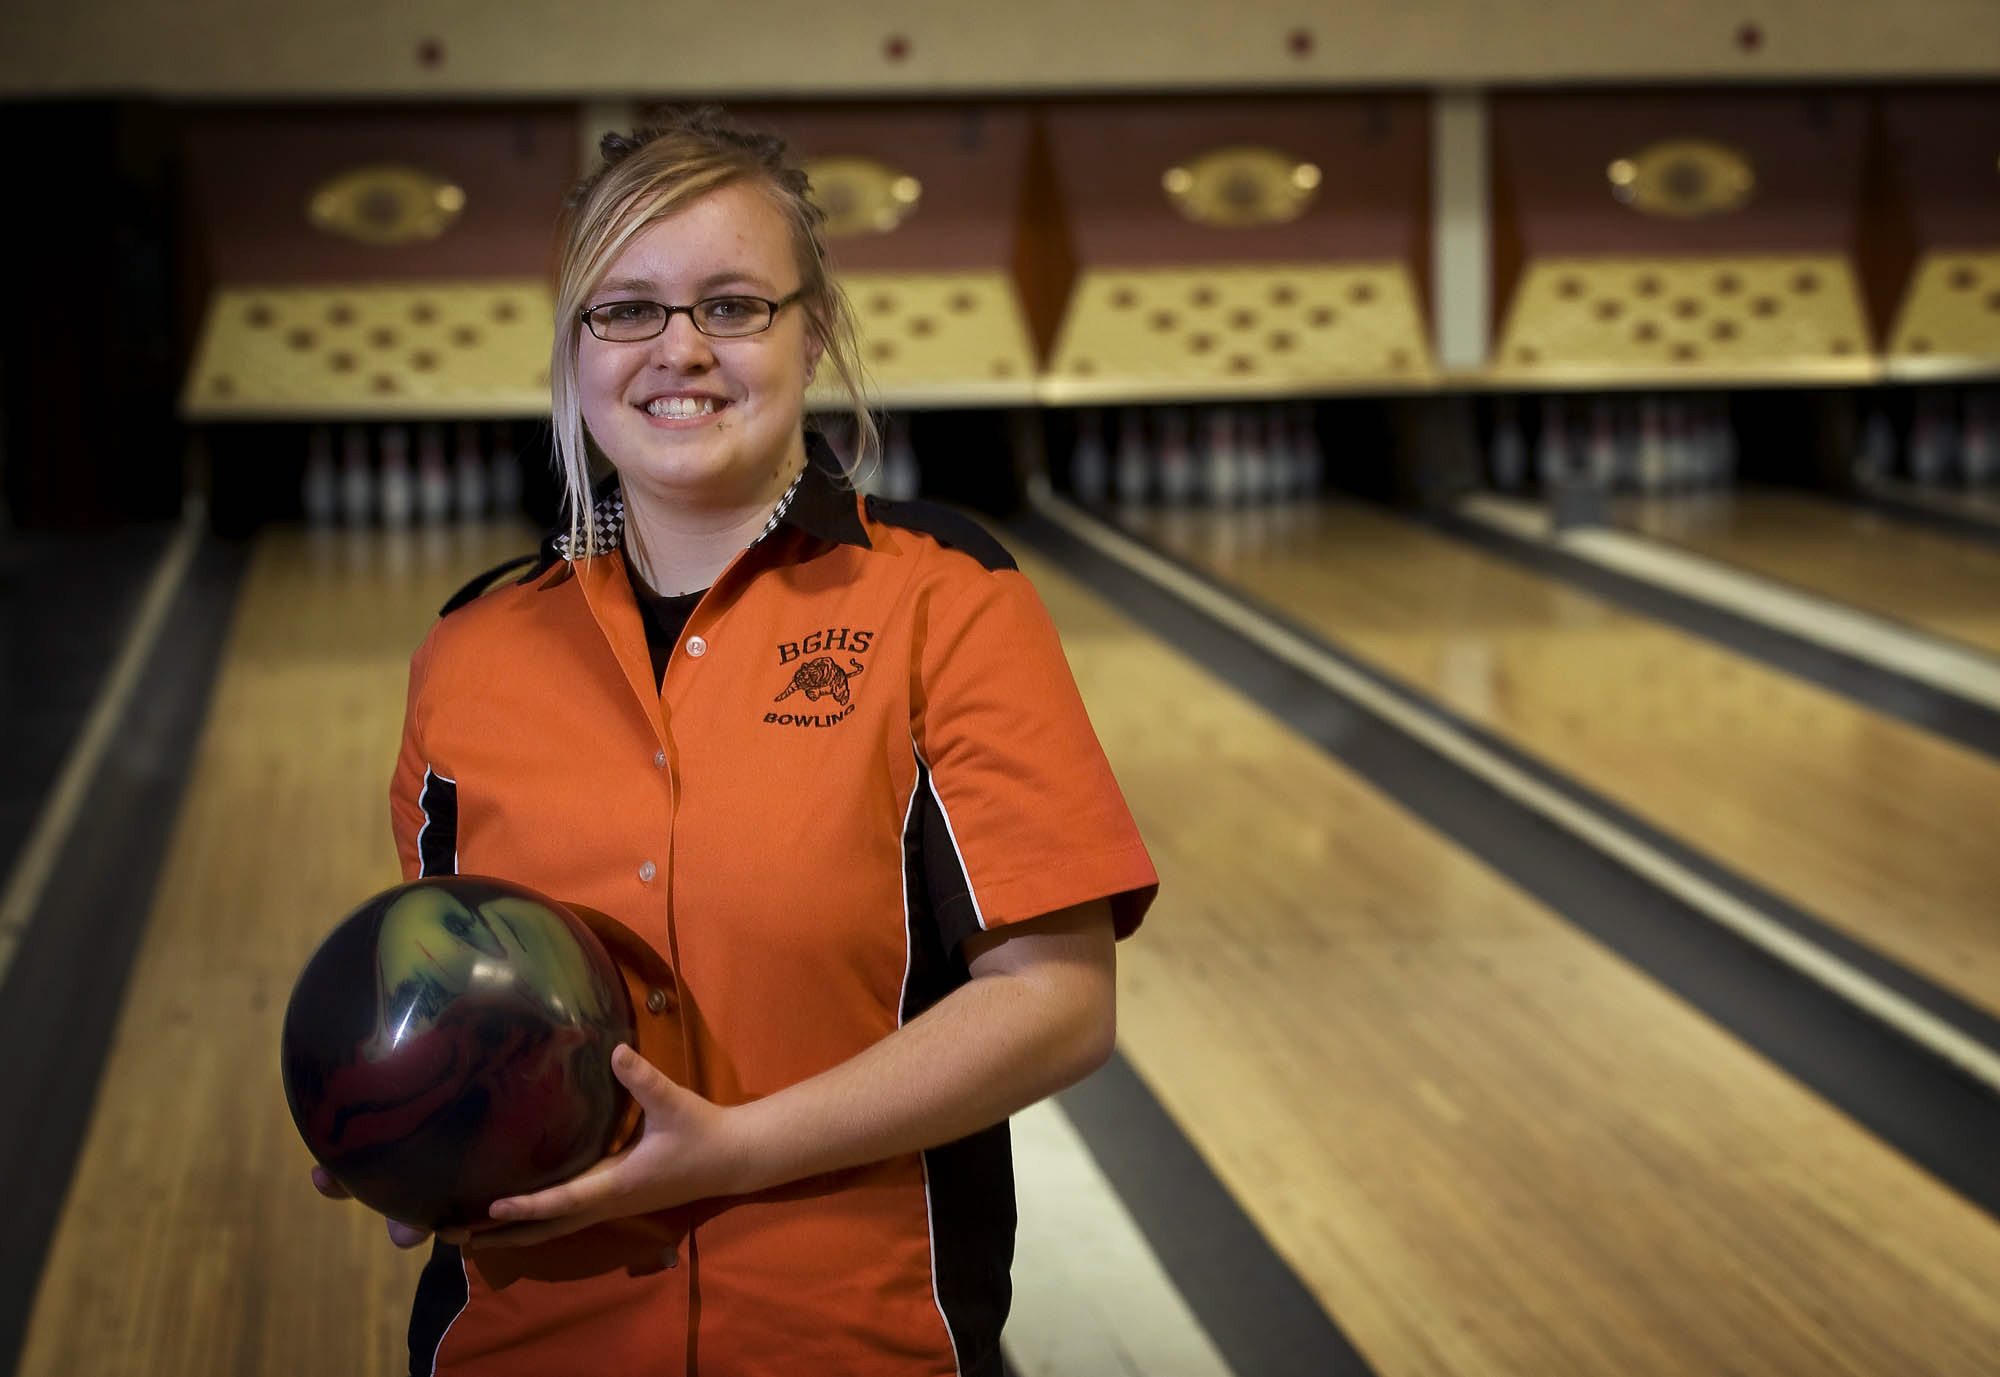 Battle Ground's Wylicia Faley poses for a portrait before a match at Tiger Bowl on Monday December 12, 2011.